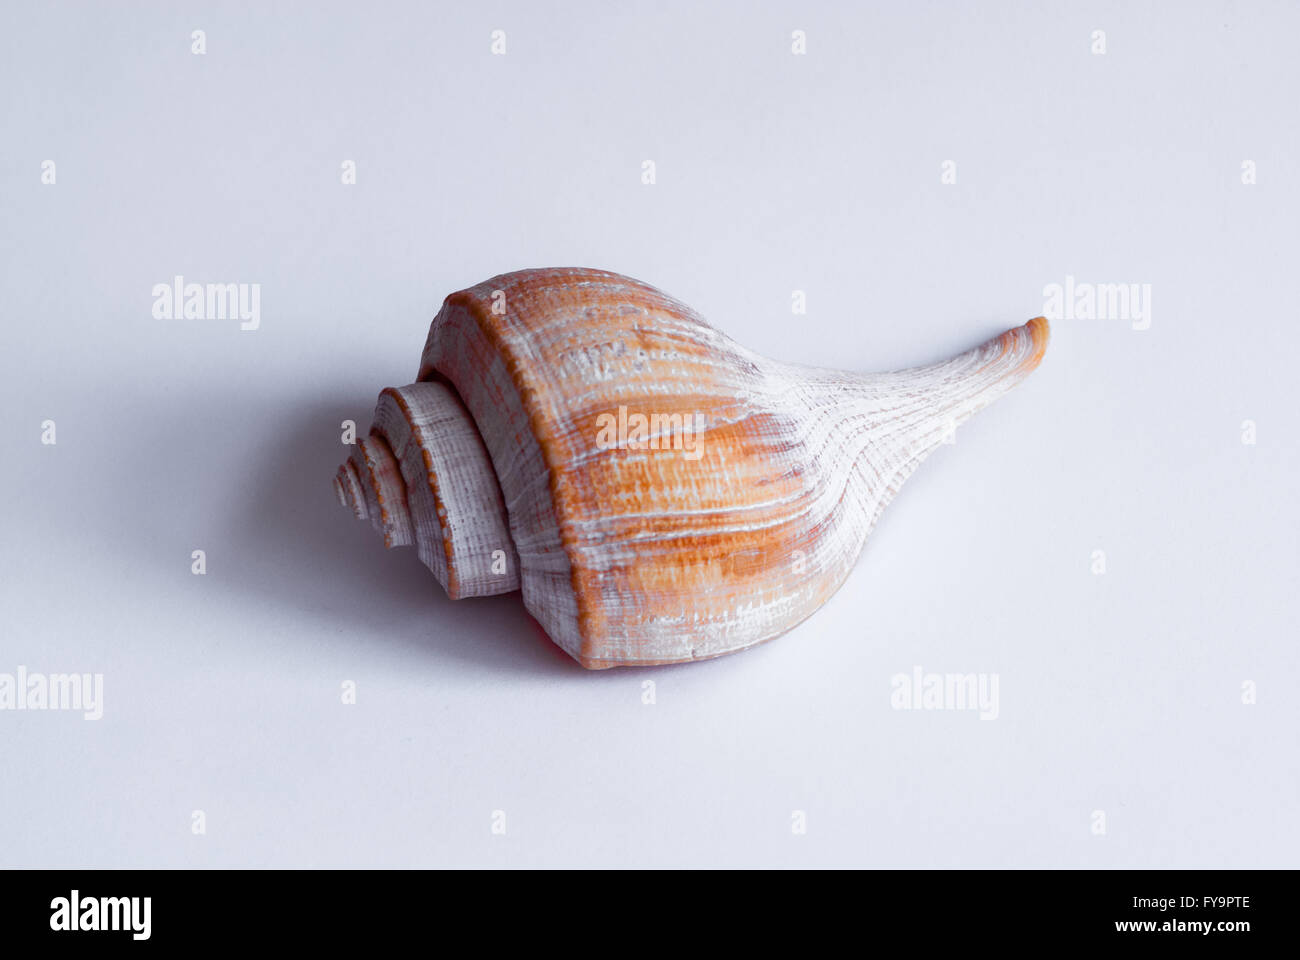 Single white and orange spiral conch from side on white background, casting shadow. Stock Photo